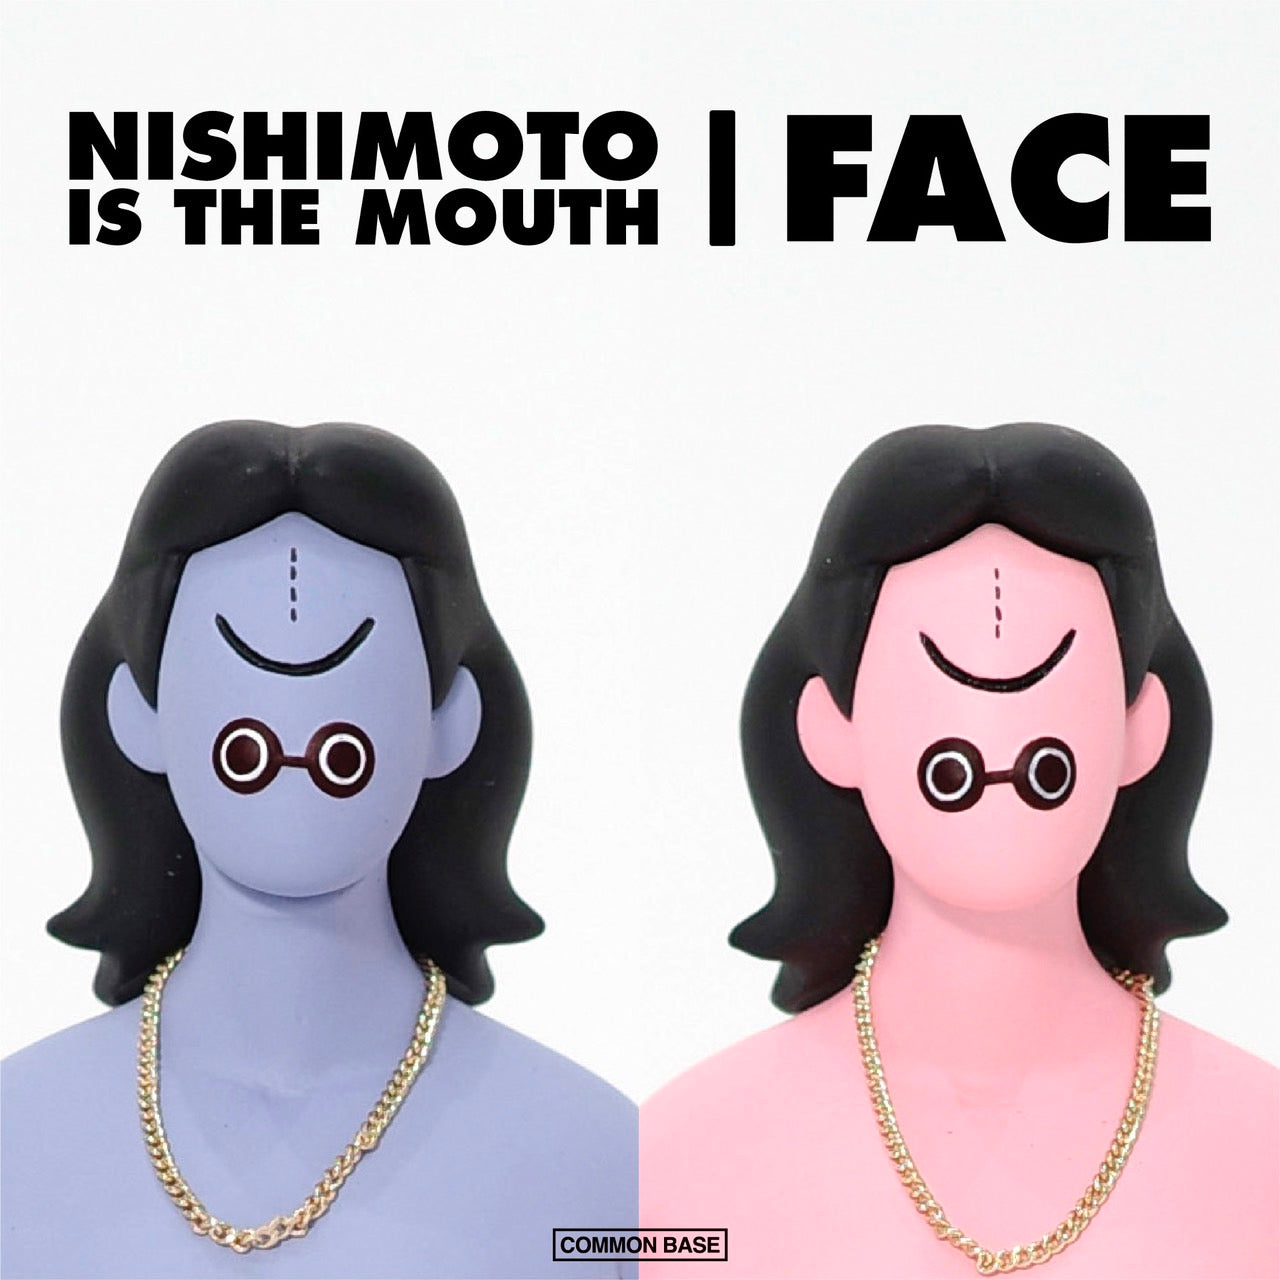 【NISHIMOTO IS THE MOUTH】<br> Collaboration figures with “face” will be released in limited quantities from 20:00 on April 15th (Monday)!